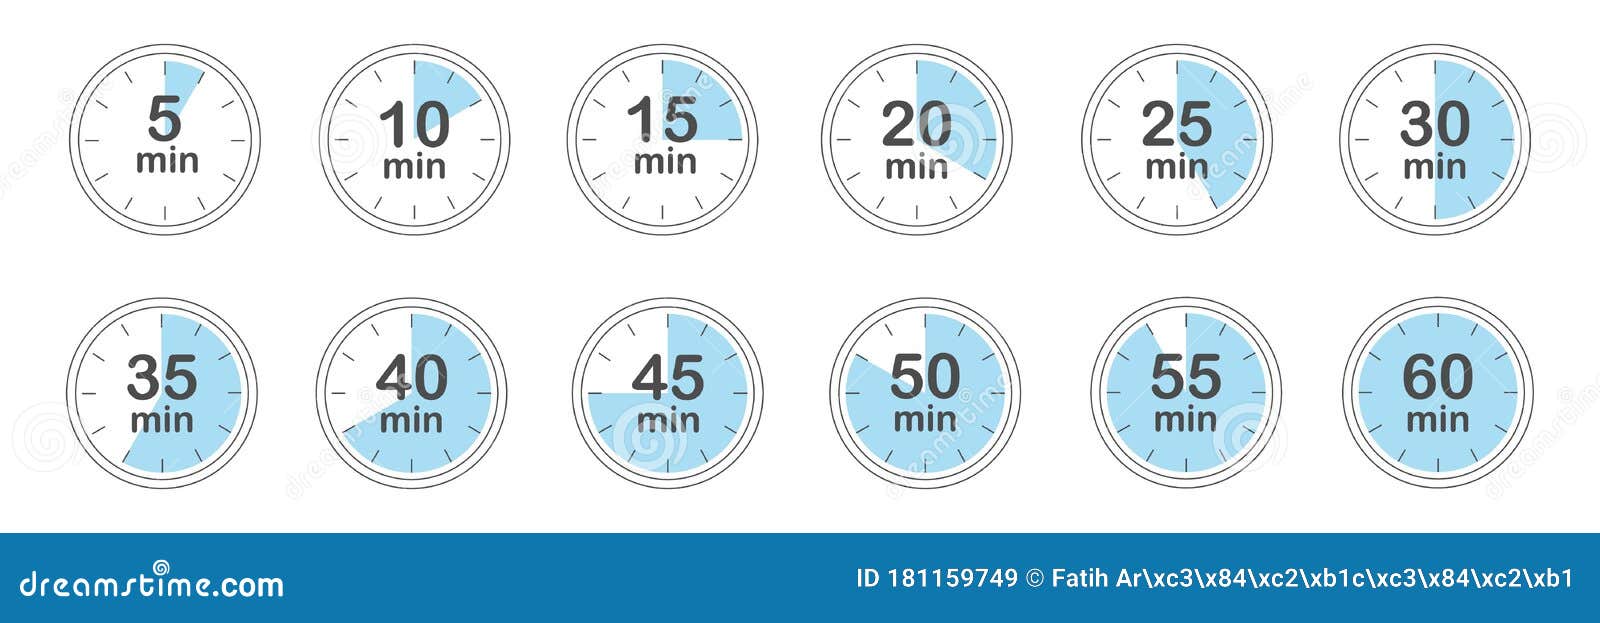 Set of Timers. 5, 10, 15, 20, 25, 30, 35, 40, 45, 50, 55, and 60 Minutes.  Countdown Timer Icons Set. Isolated Vector Illustration. Stock Vector -  Illustration of hour, minutes: 181159749